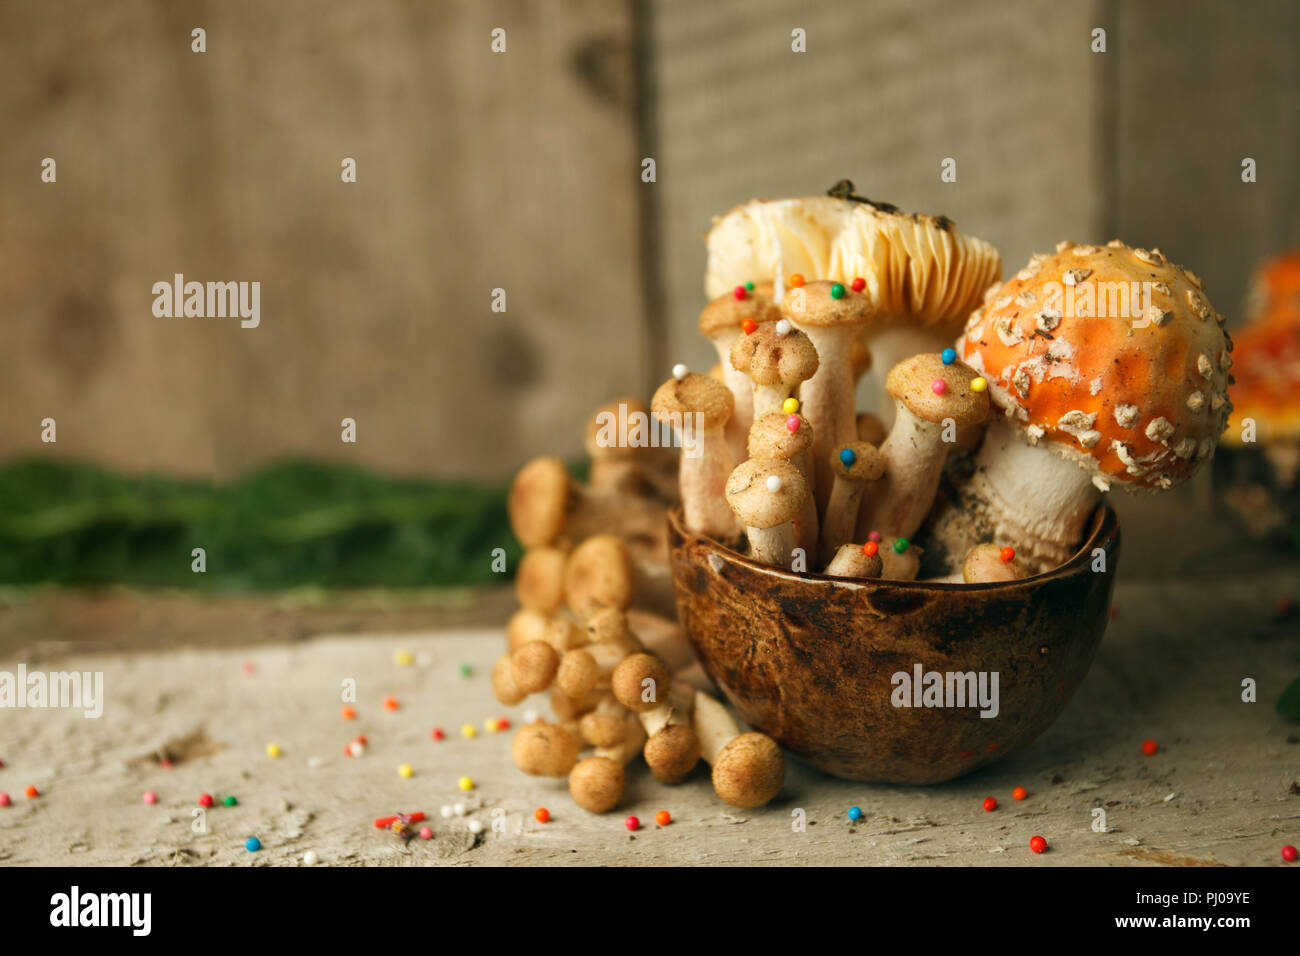 Magic fairytale party table decor, mushroom with confectionary in cup on wooden background, poison toxic food Stock Photo